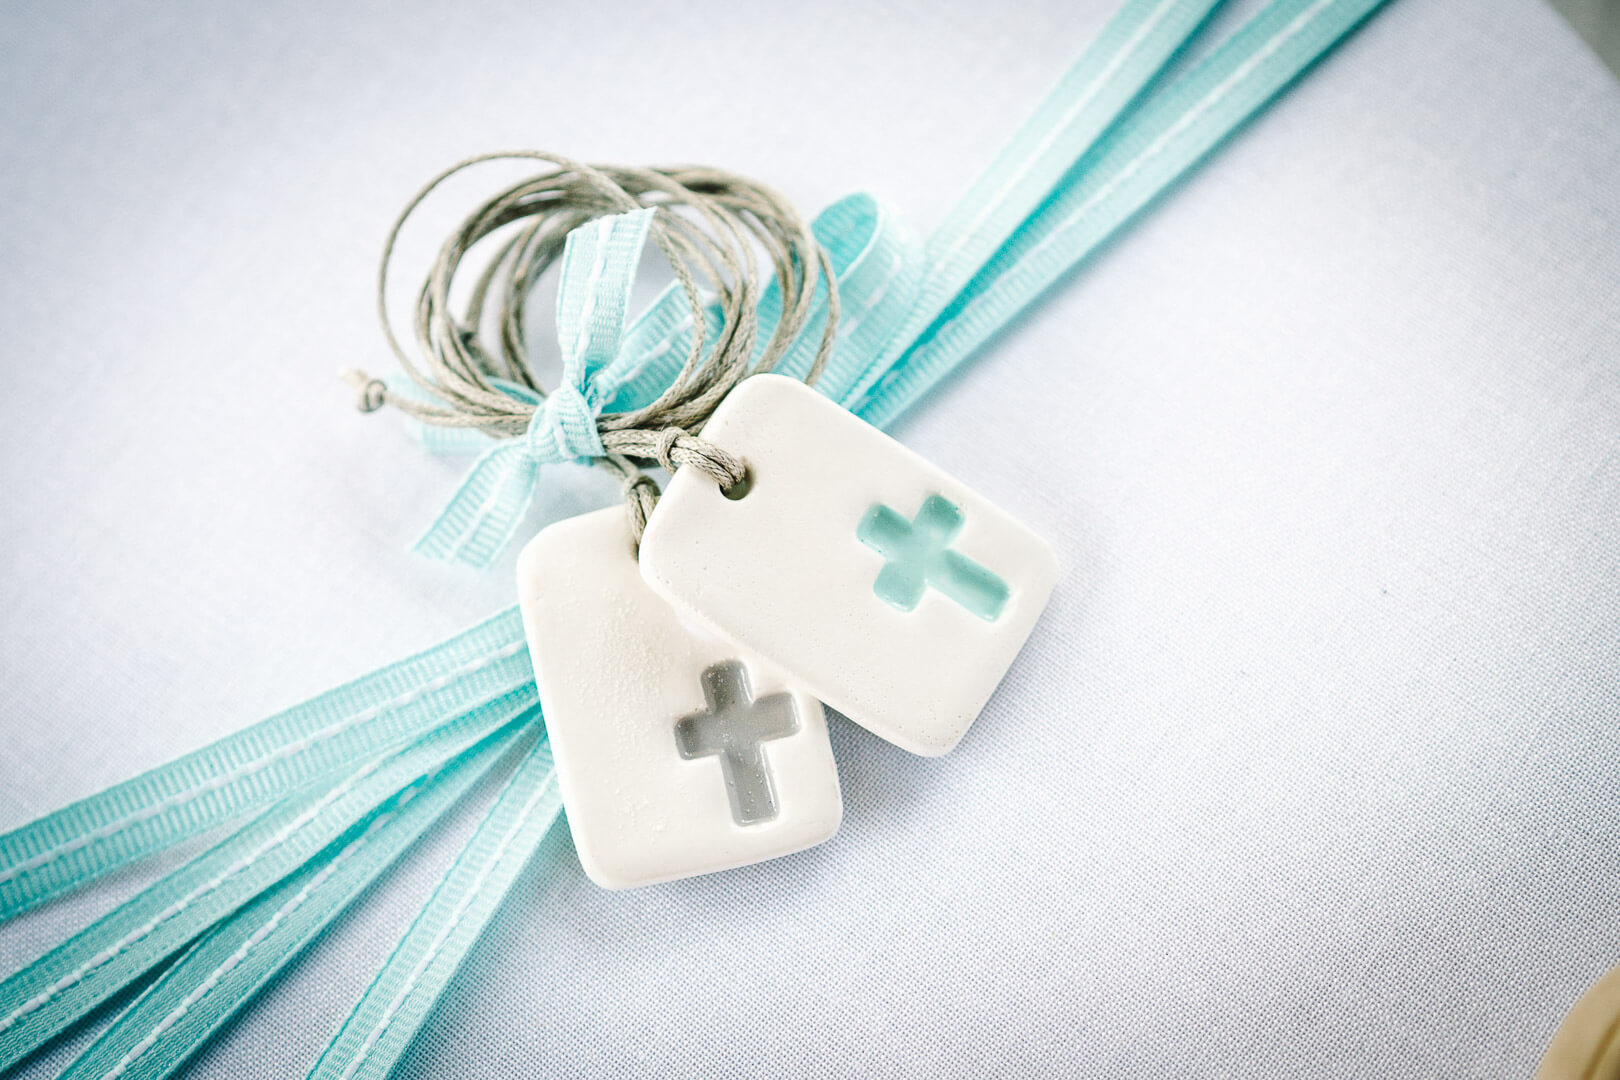 Faithful keepsake: Blue bracelets with crosses commemorate a special occasion.